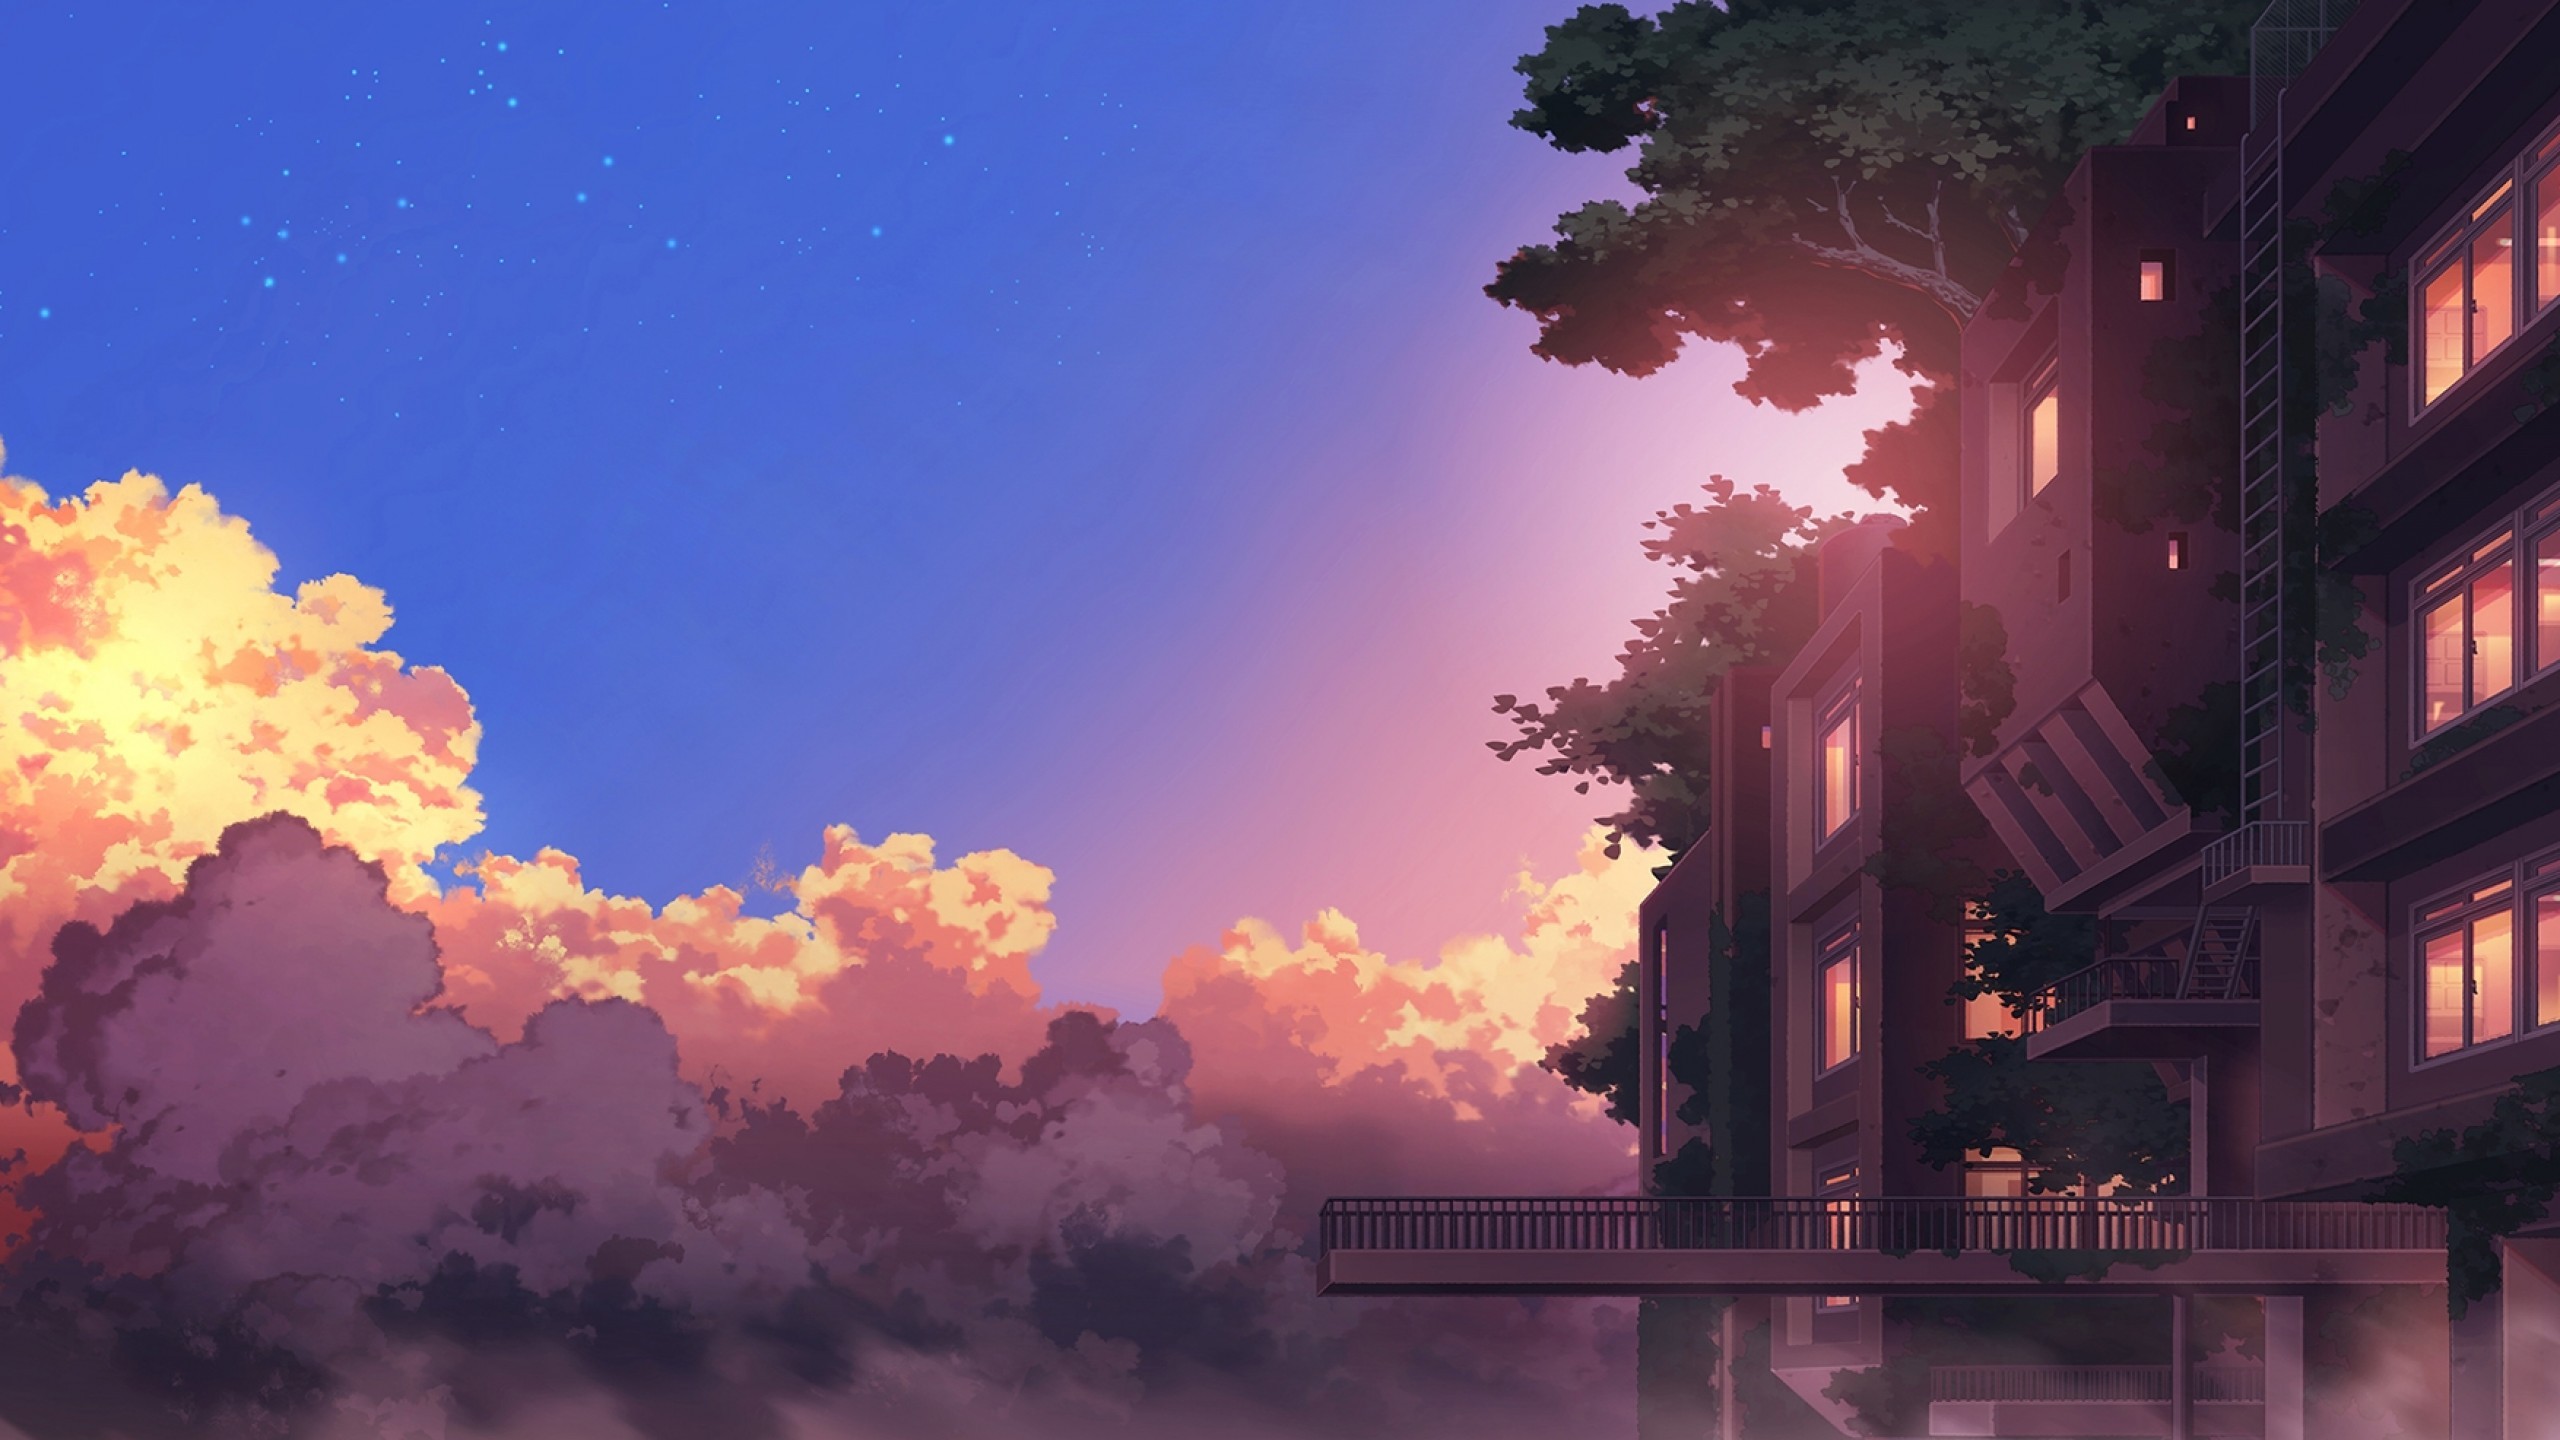 Anime Landscape, Building, Sunset, Clouds, Scenic - Scenery Anime City  Sunset - 2560x1440 Wallpaper 